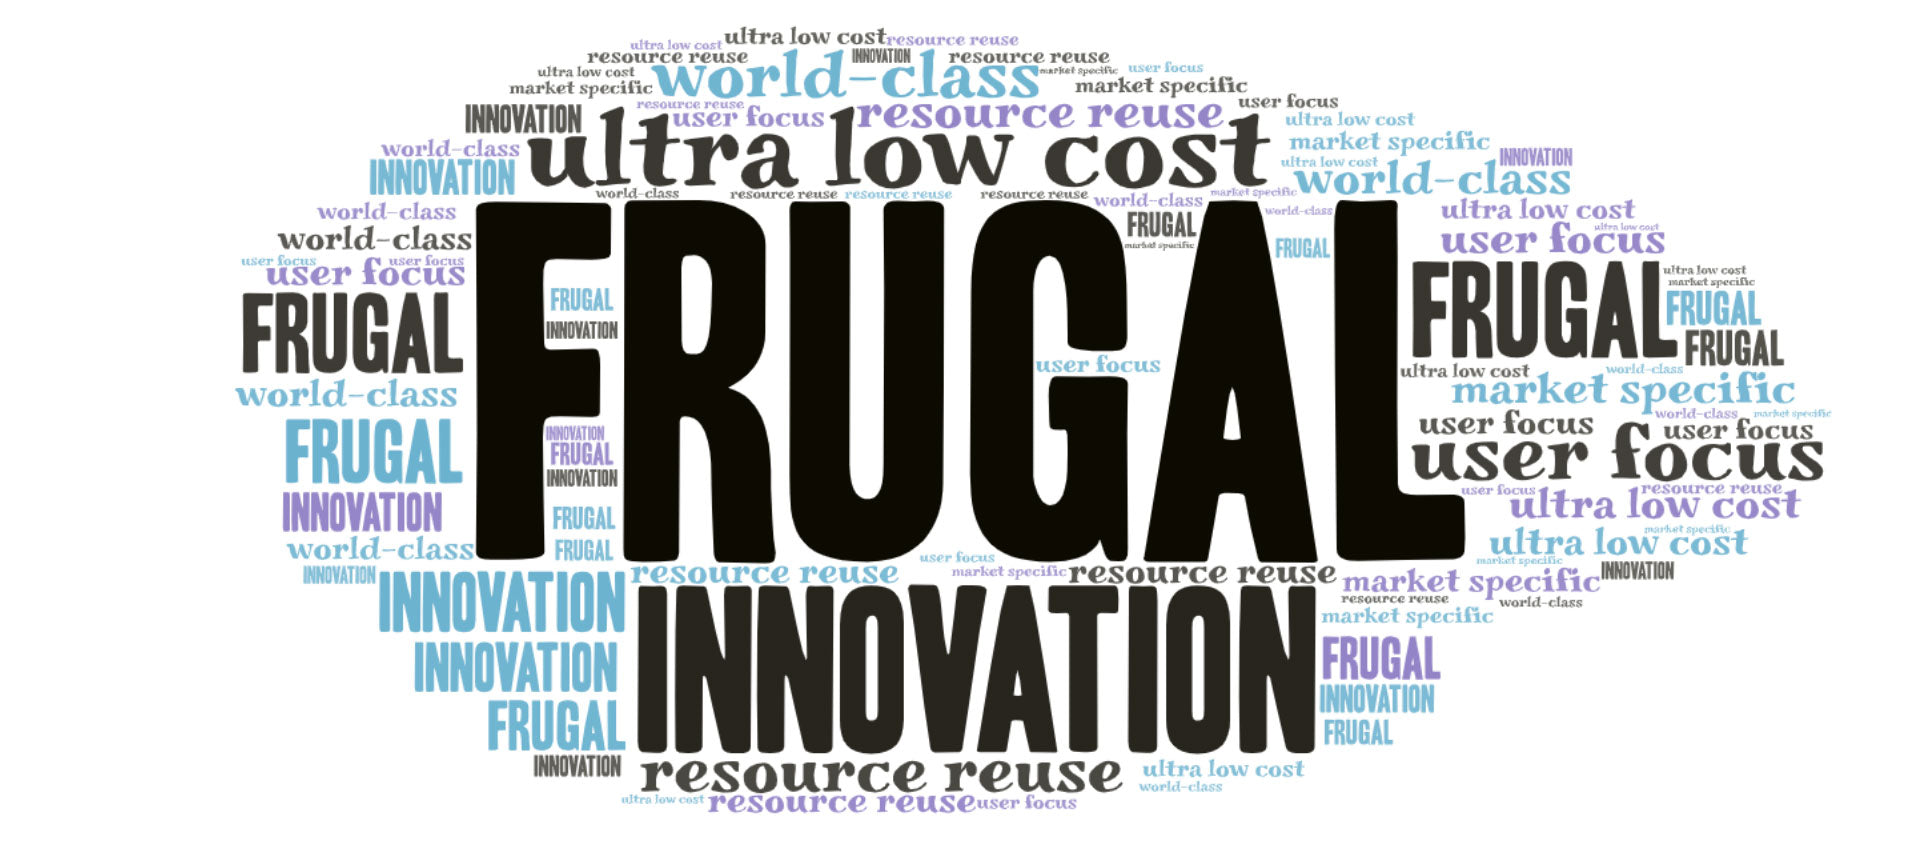 Frugal Innovation: A feasible approach for aspirational products?